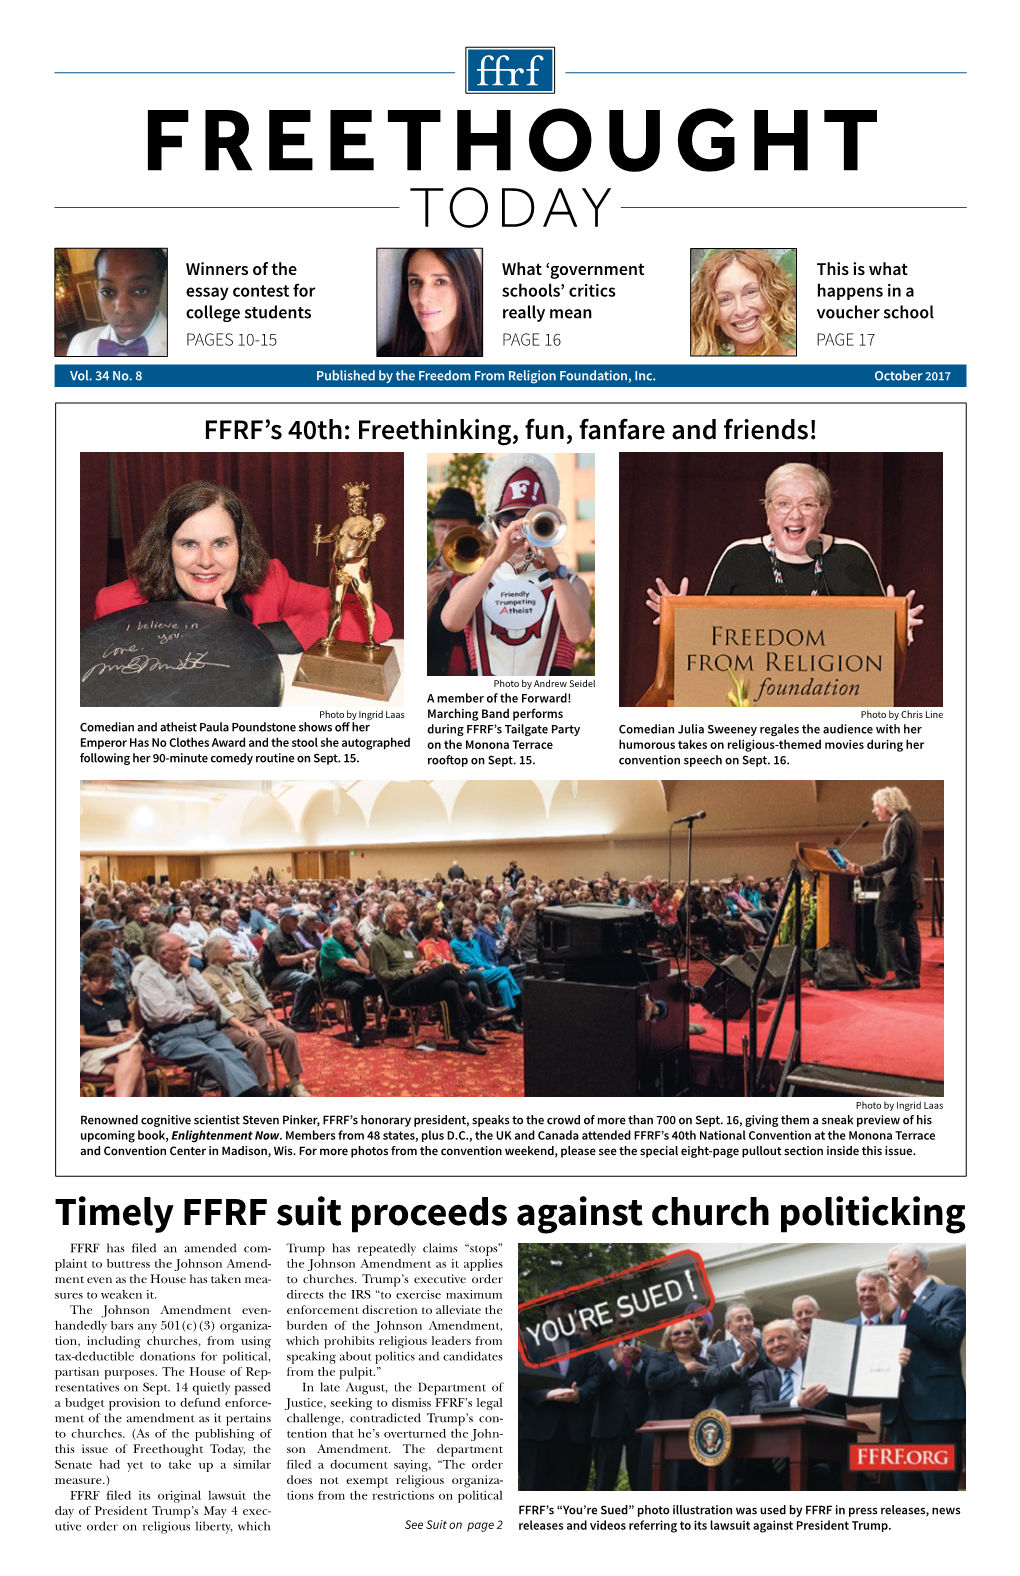 Timely FFRF Suit Proceeds Against Church Politicking